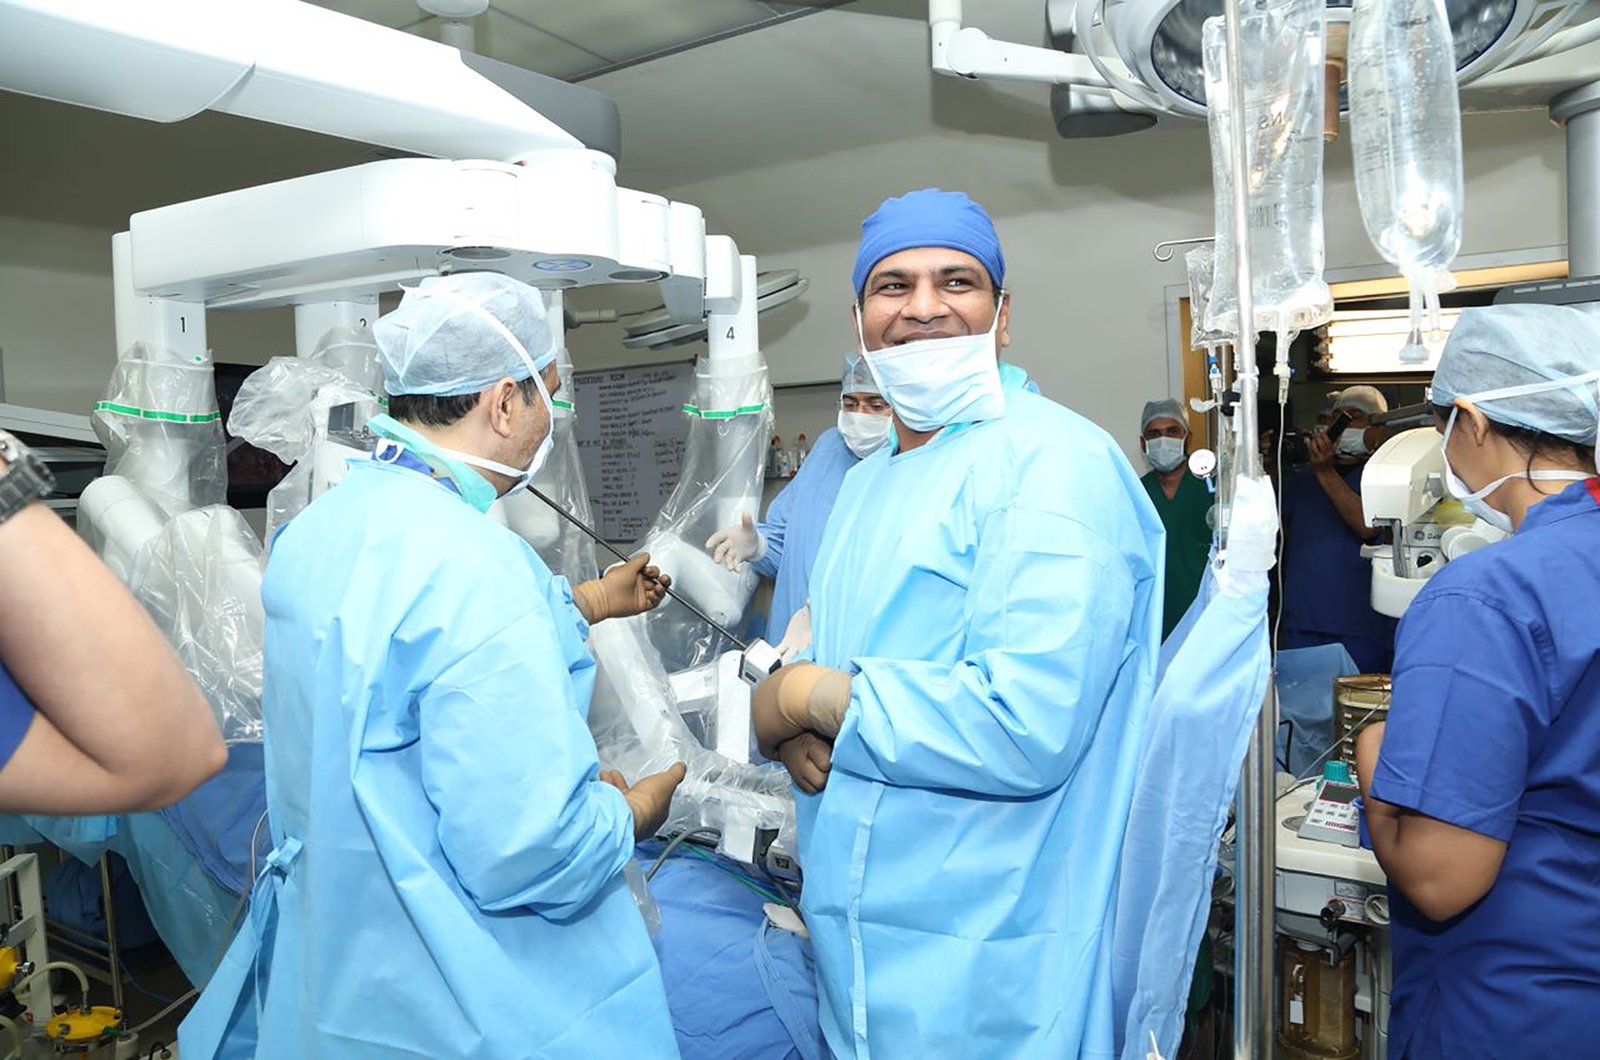 Fortis Mohali Becomes 4th Center In Country To Perform Advanced Transplant, Lifeinchd